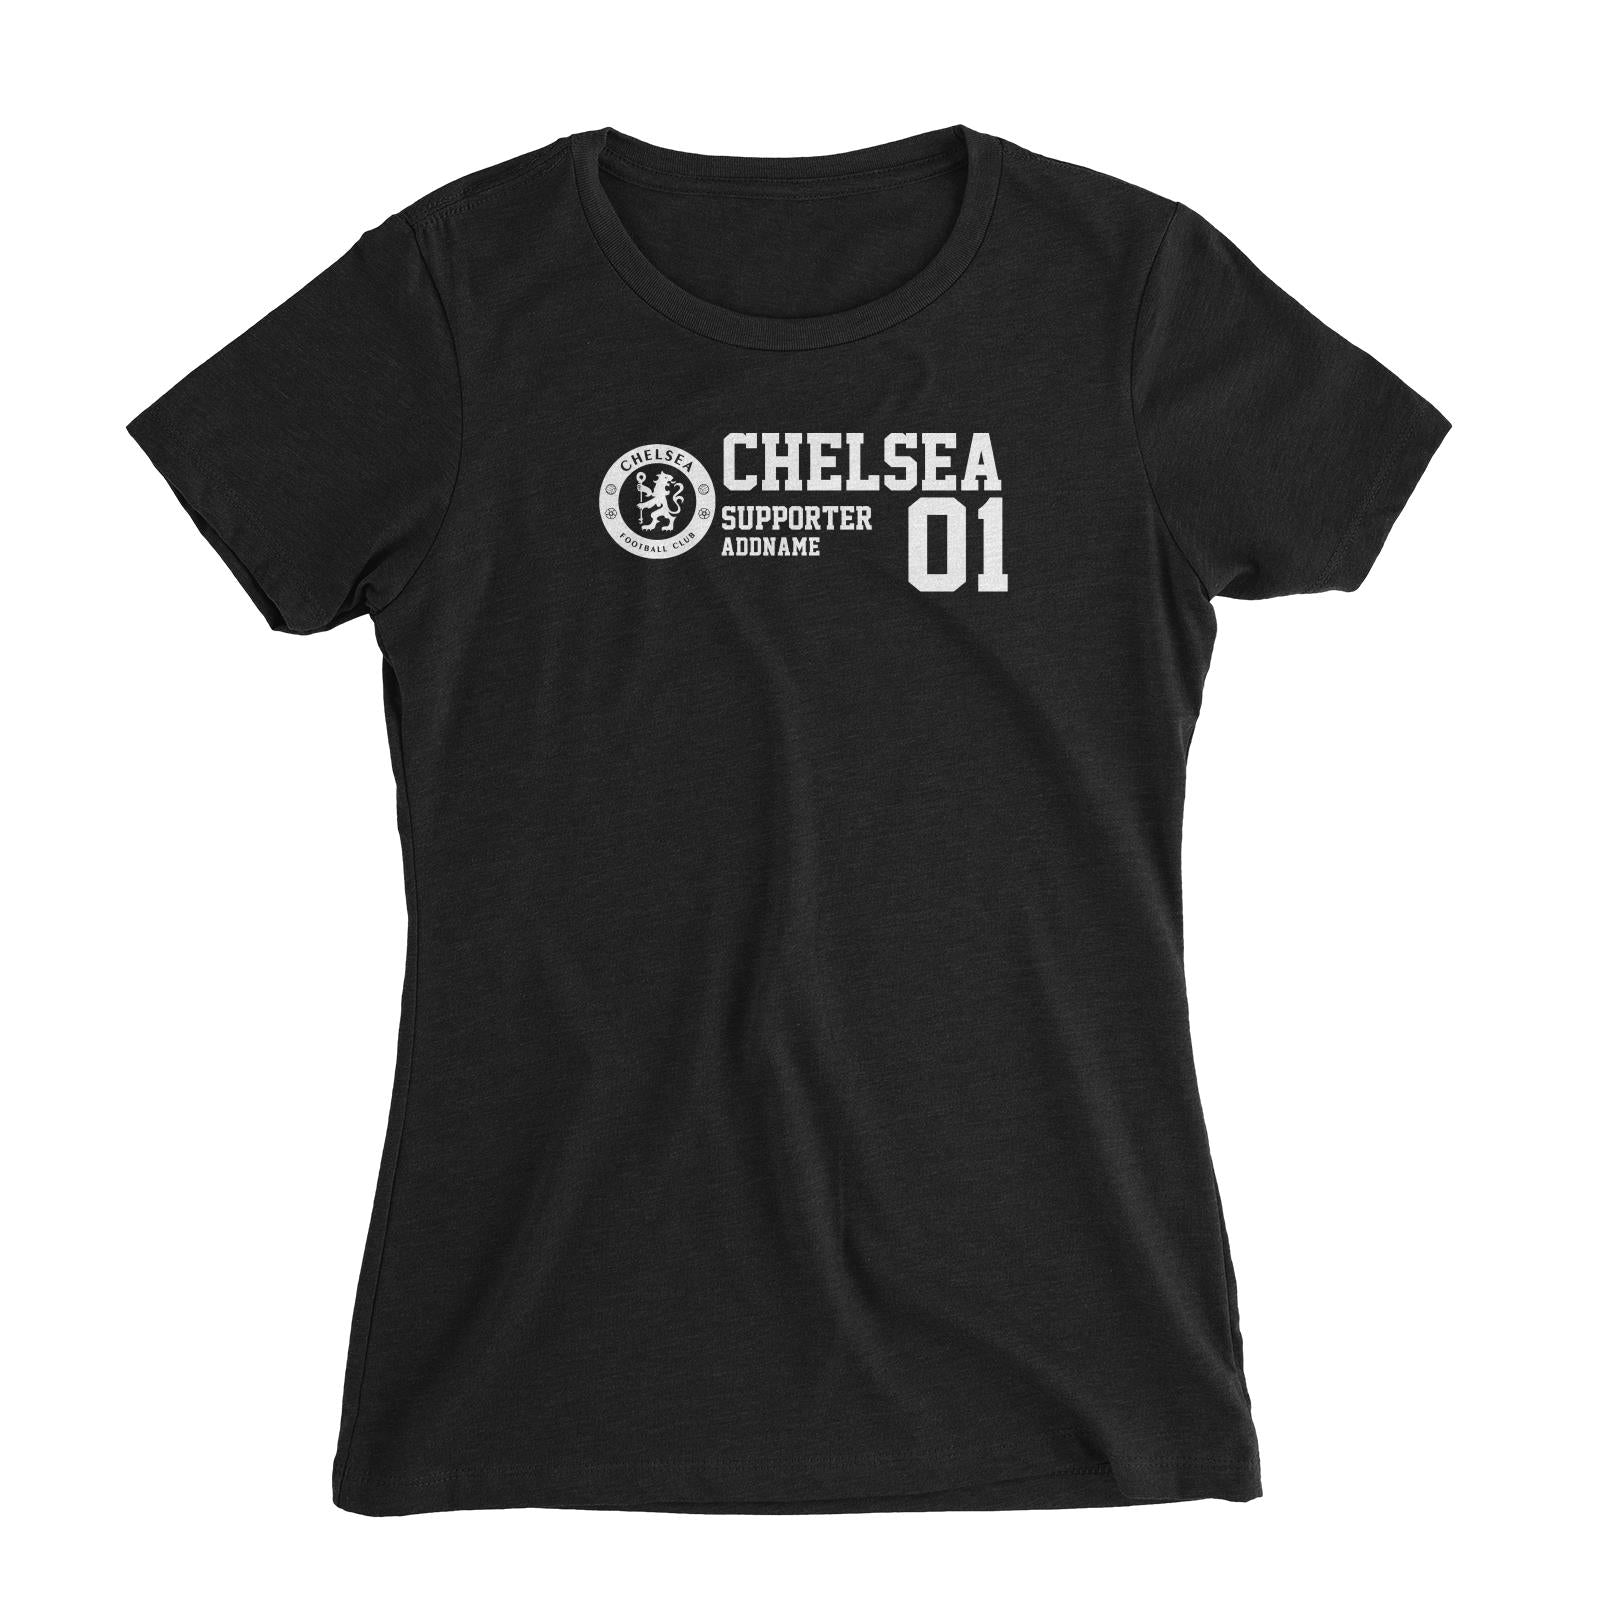 Chelsea Football Keep Supporter Addname Women Slim Fit T-Shirt